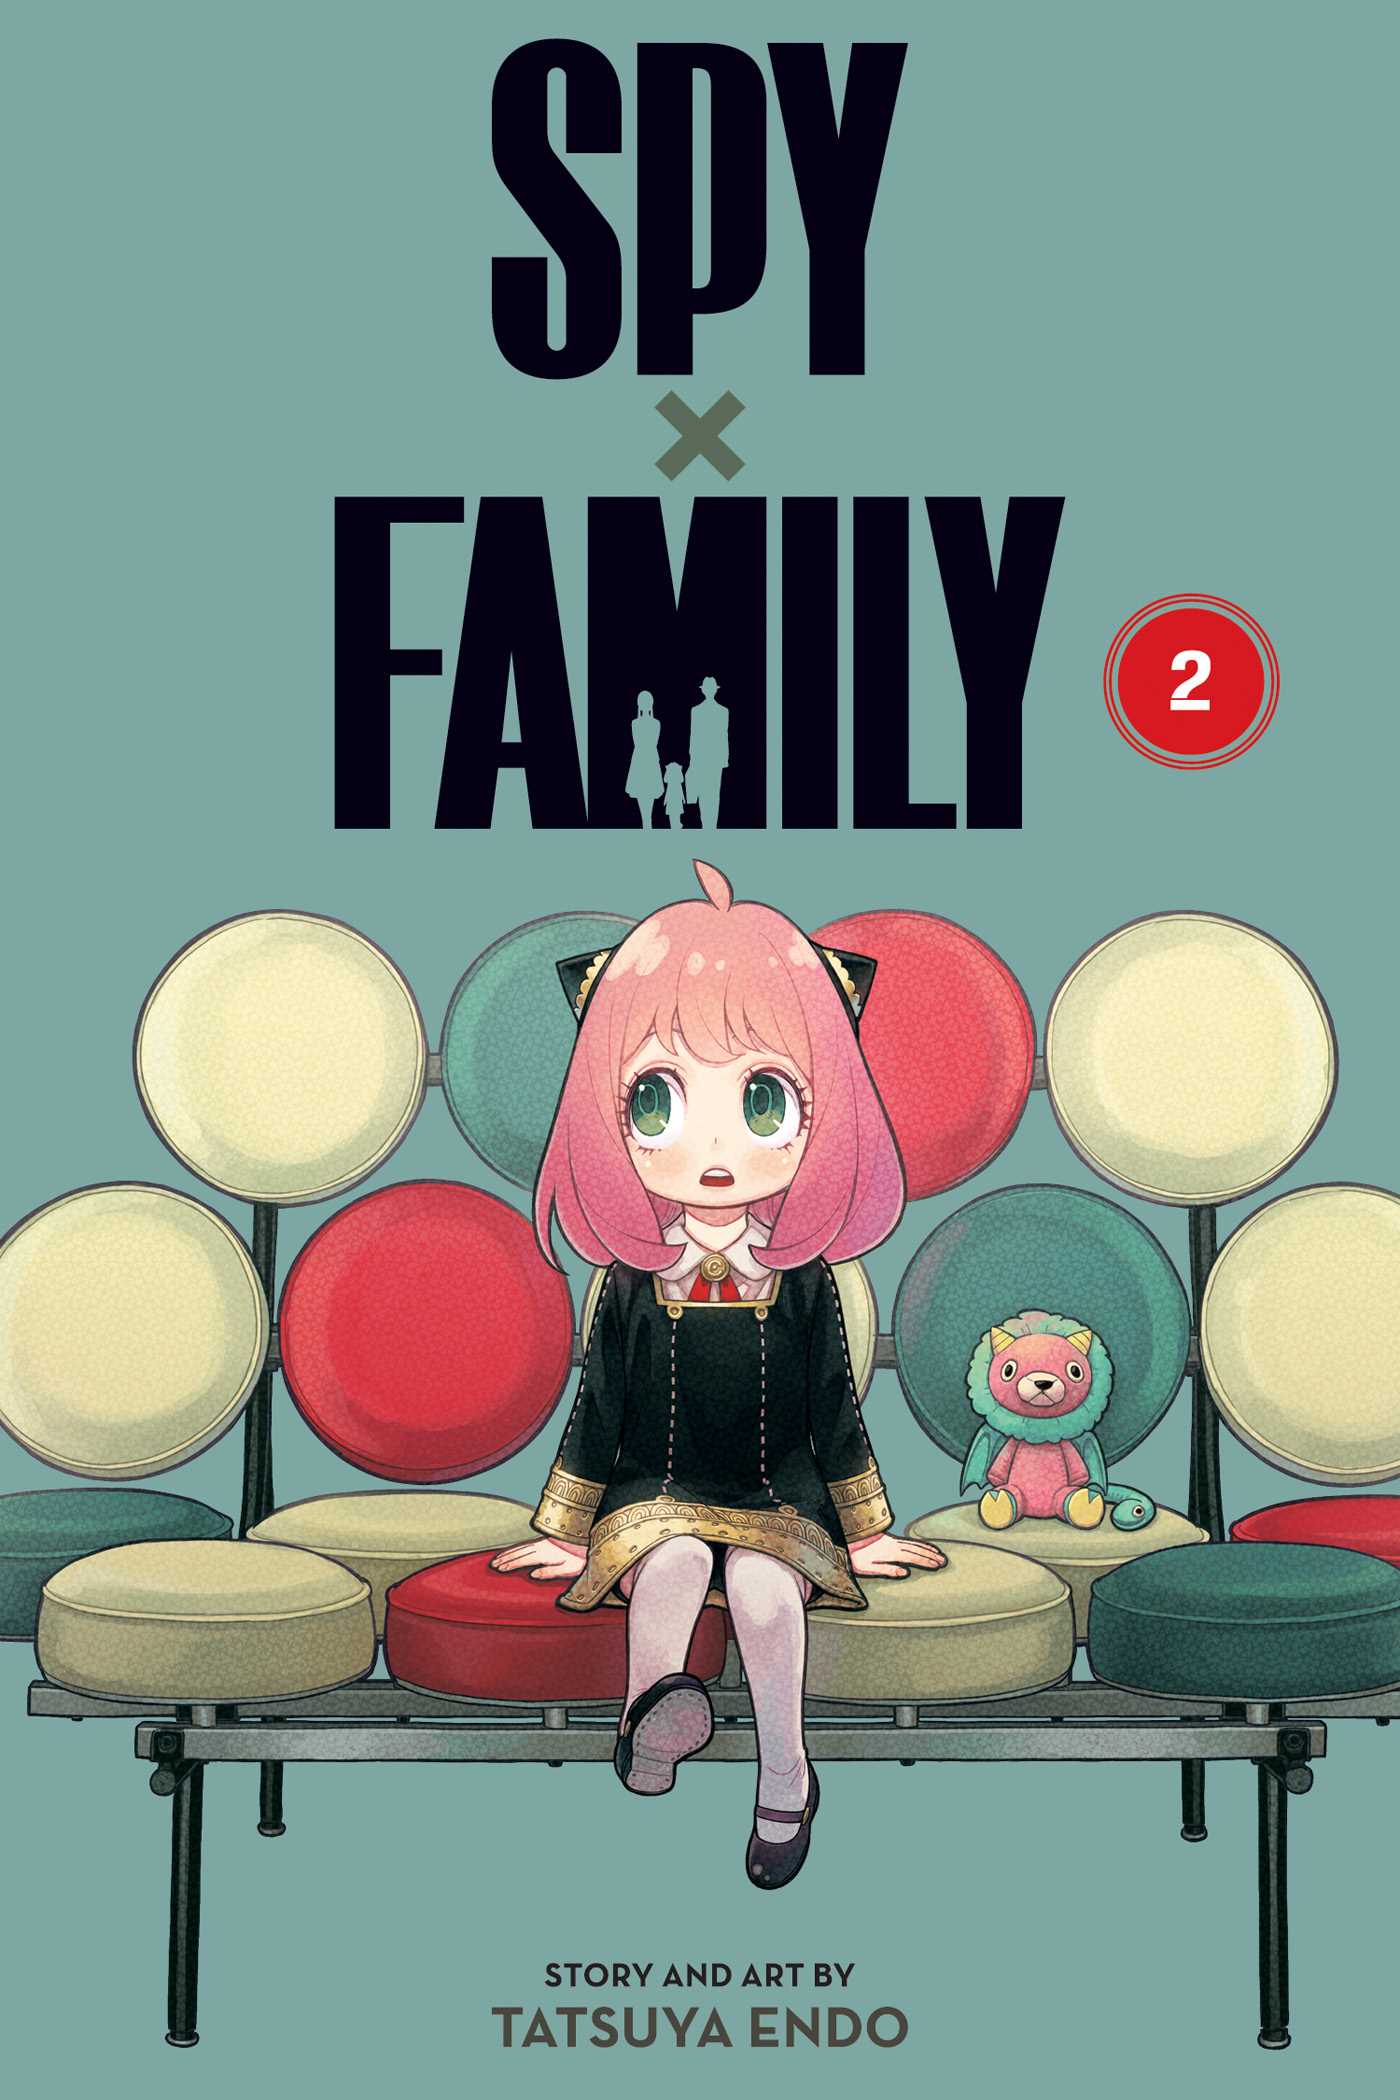 SpyxFamily 2 graphic novel book cover